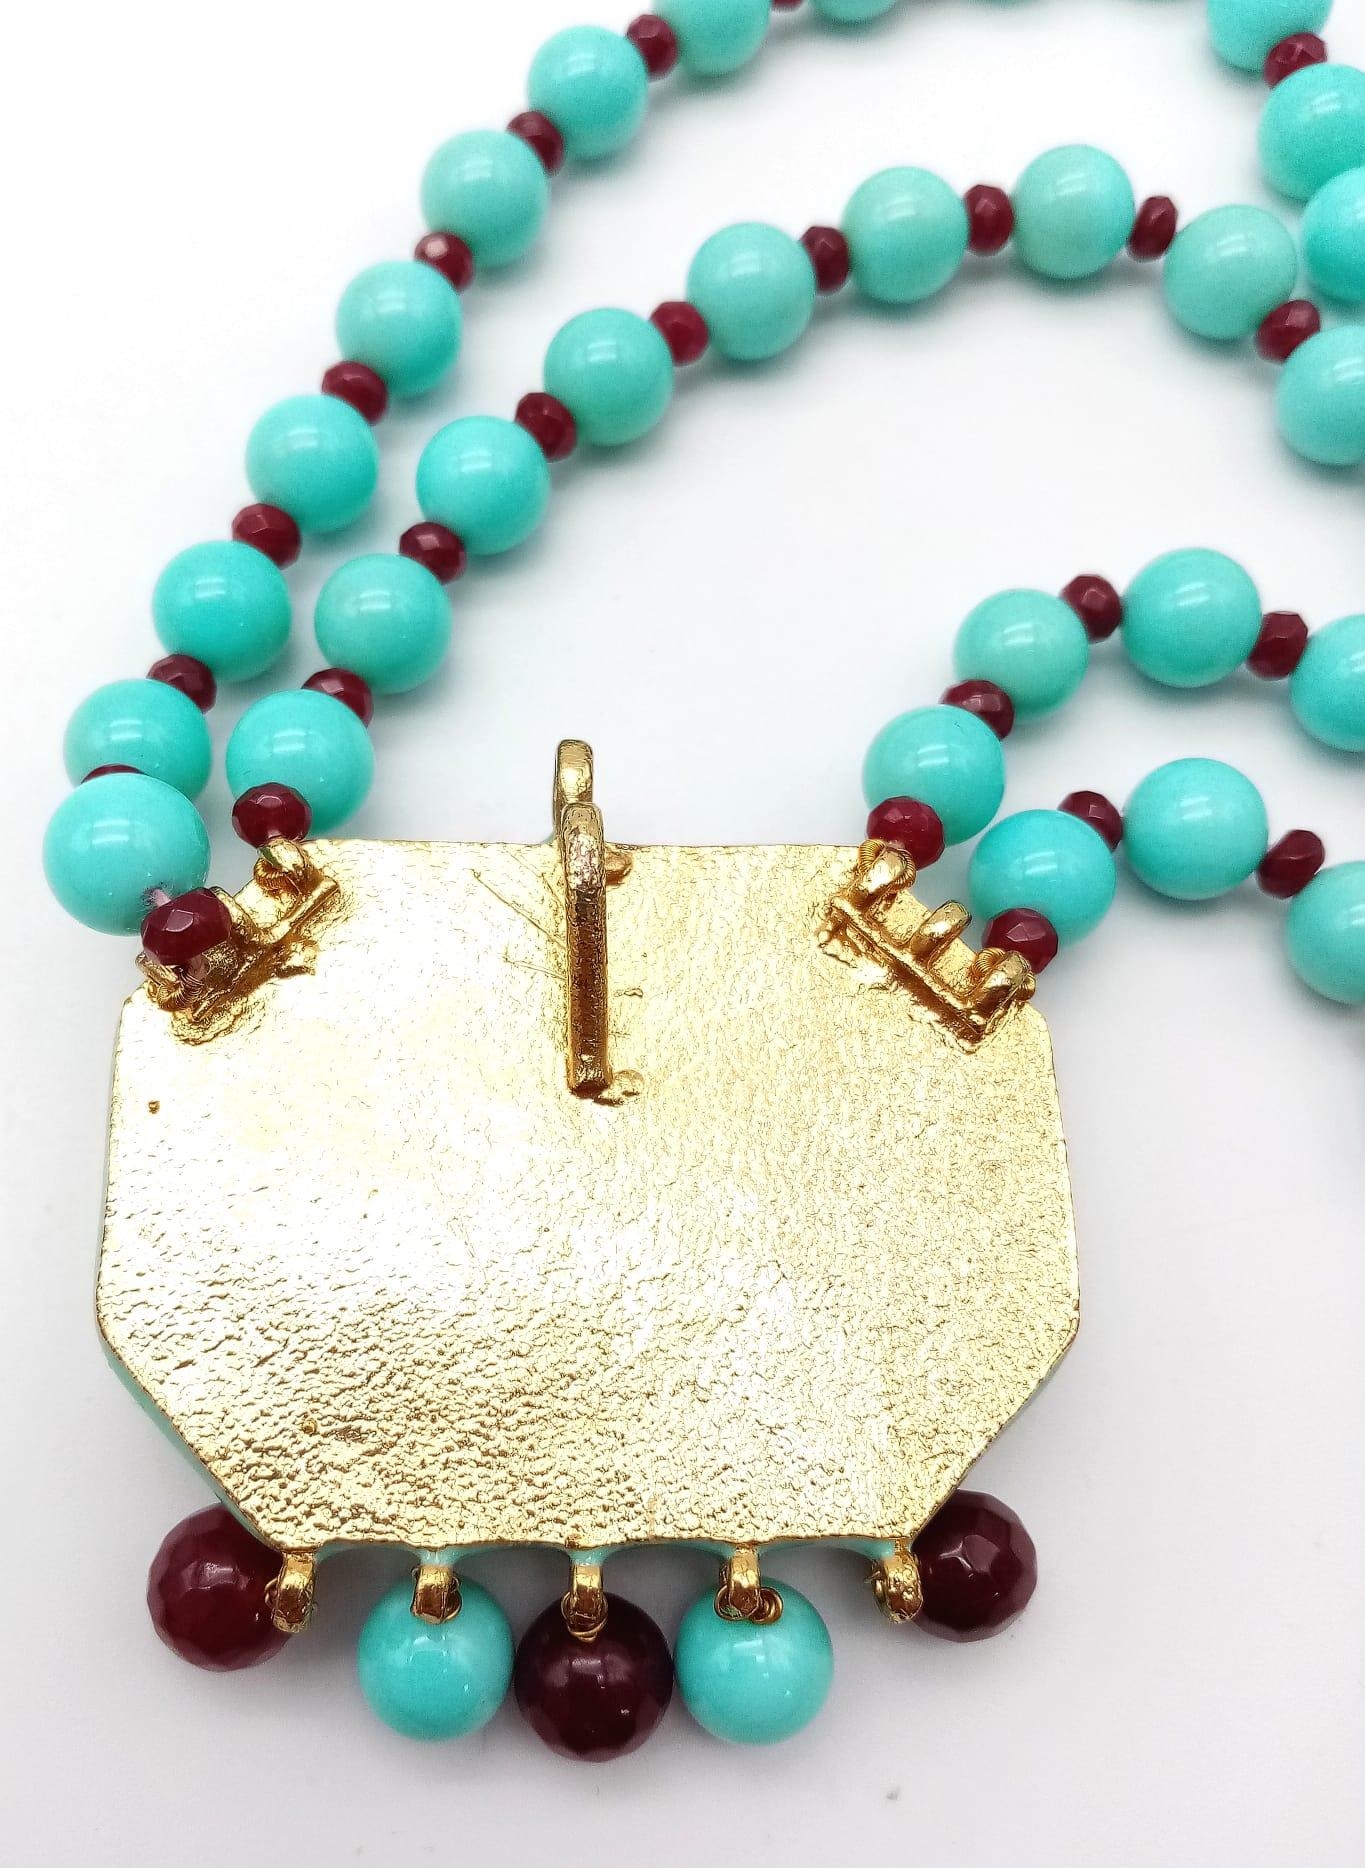 Stunning Turquoise & Garnet 2 row necklace, gold gilded silver with vintage push-pin clasp. 28cms in - Image 4 of 6